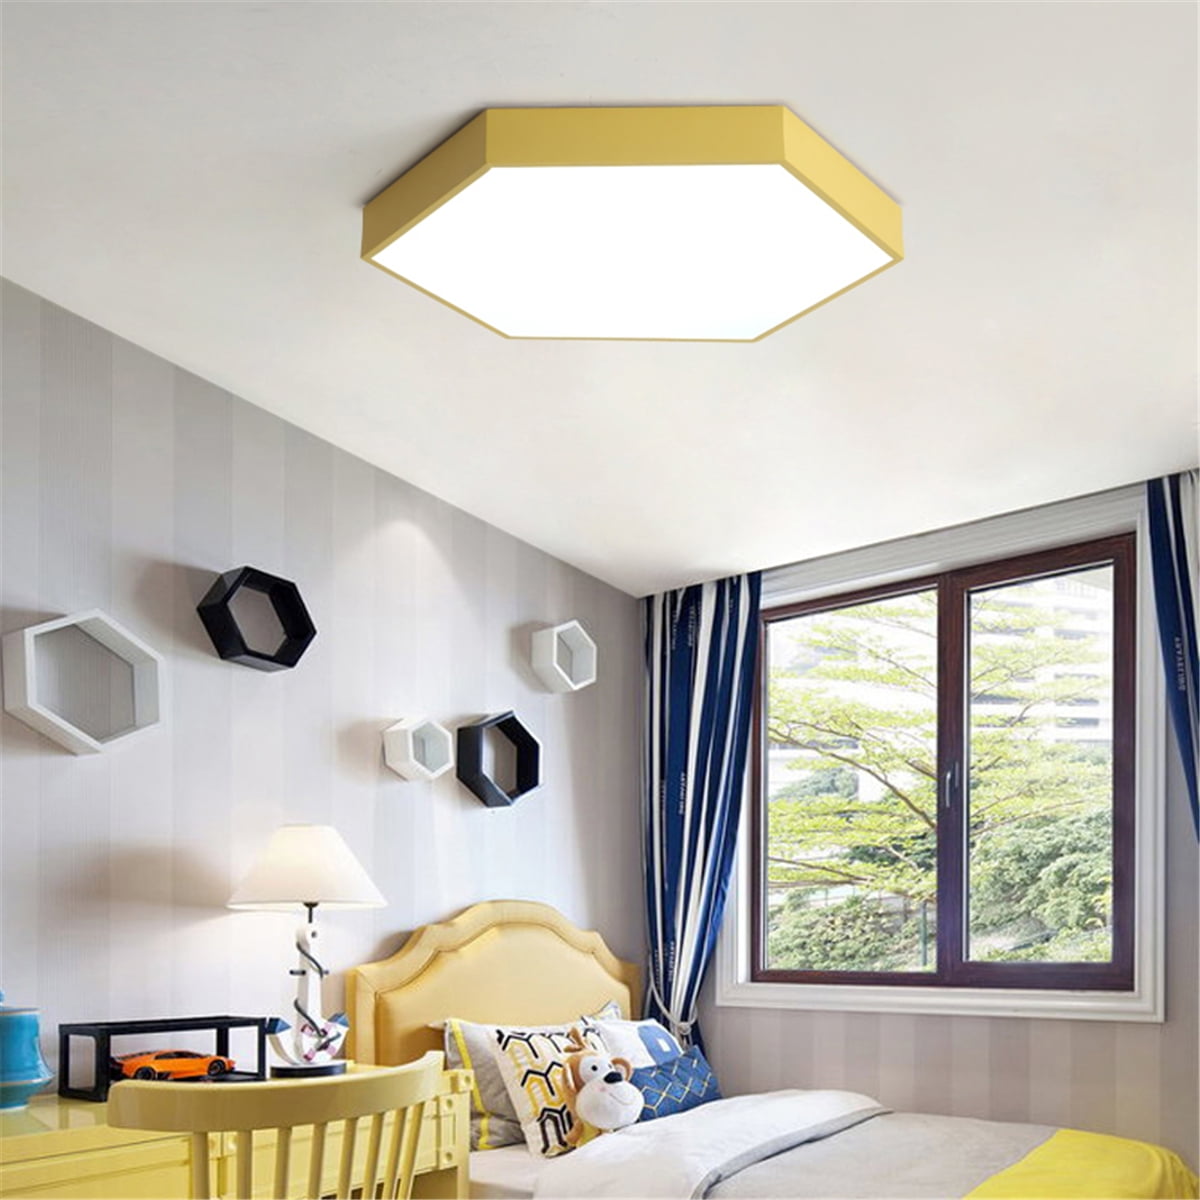 Make Home: No Ceiling Light In Bedroom Solution / repurposed lamps for